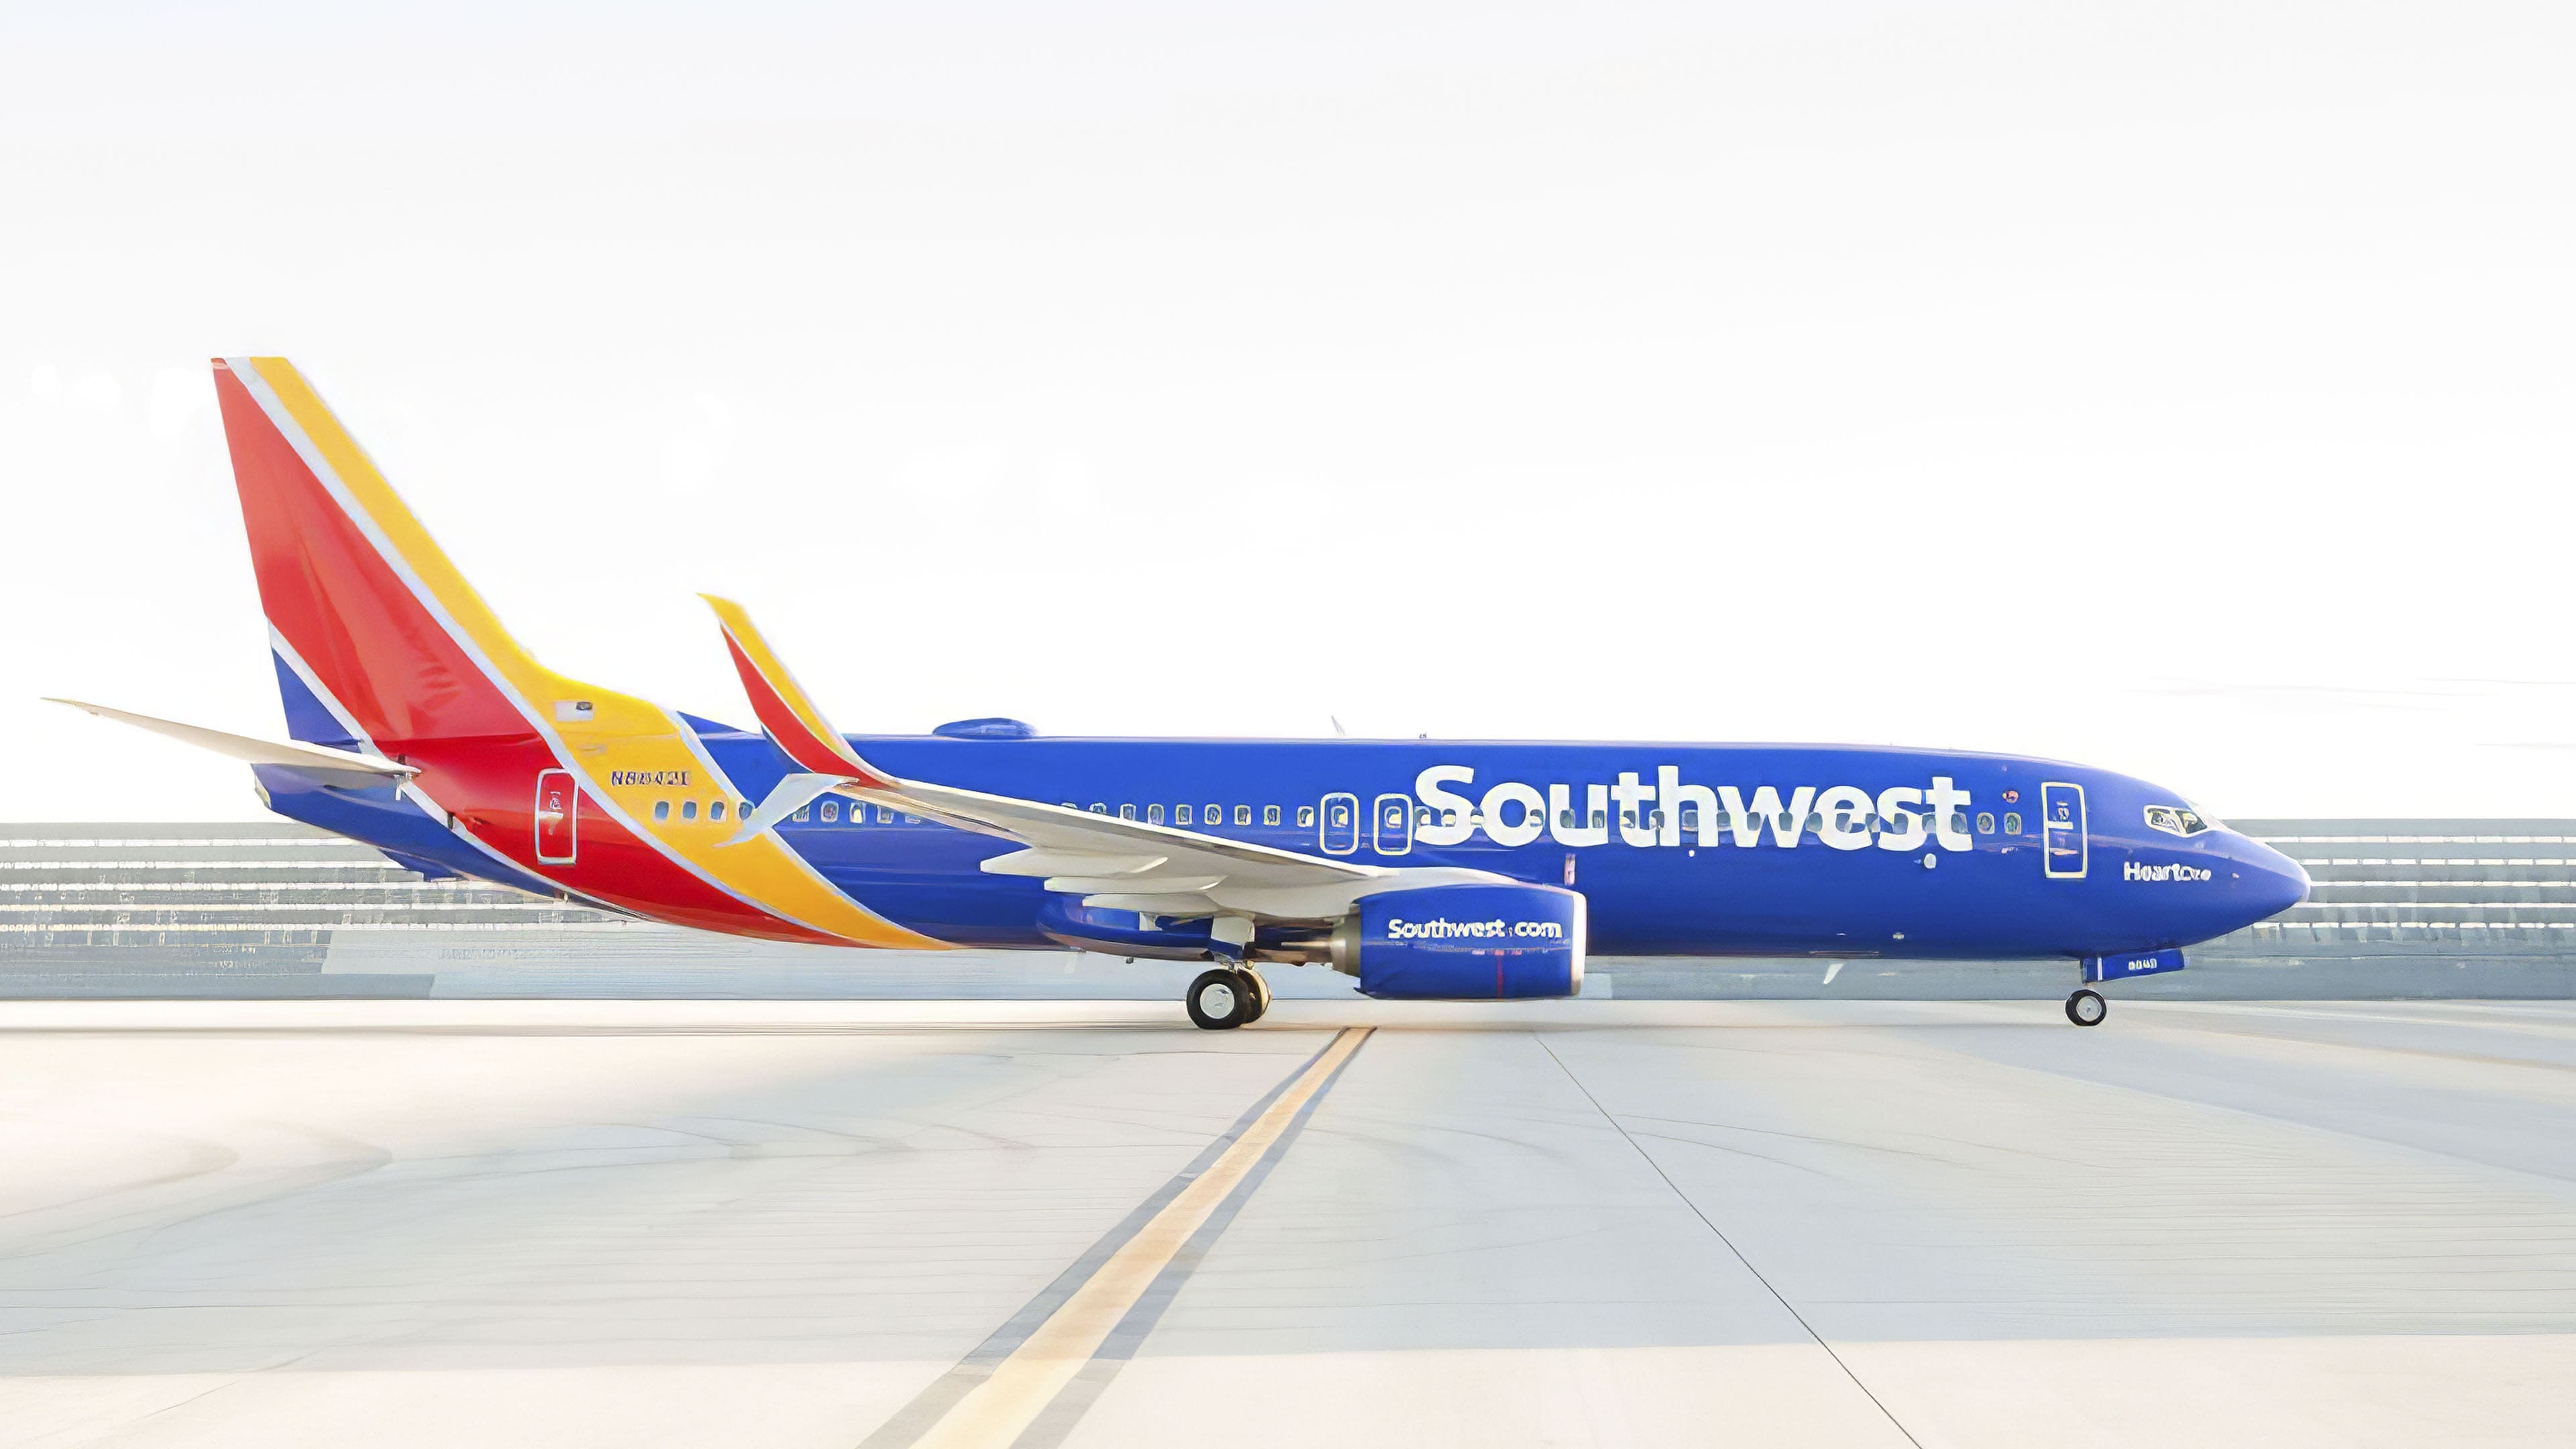 HD wallpaper, Png Format, 3840X2160 4K Desktop, Southwest Airlines, Logo Meaning, Historical Significance, Desktop 4K Southwest Airlines Wallpaper Photo